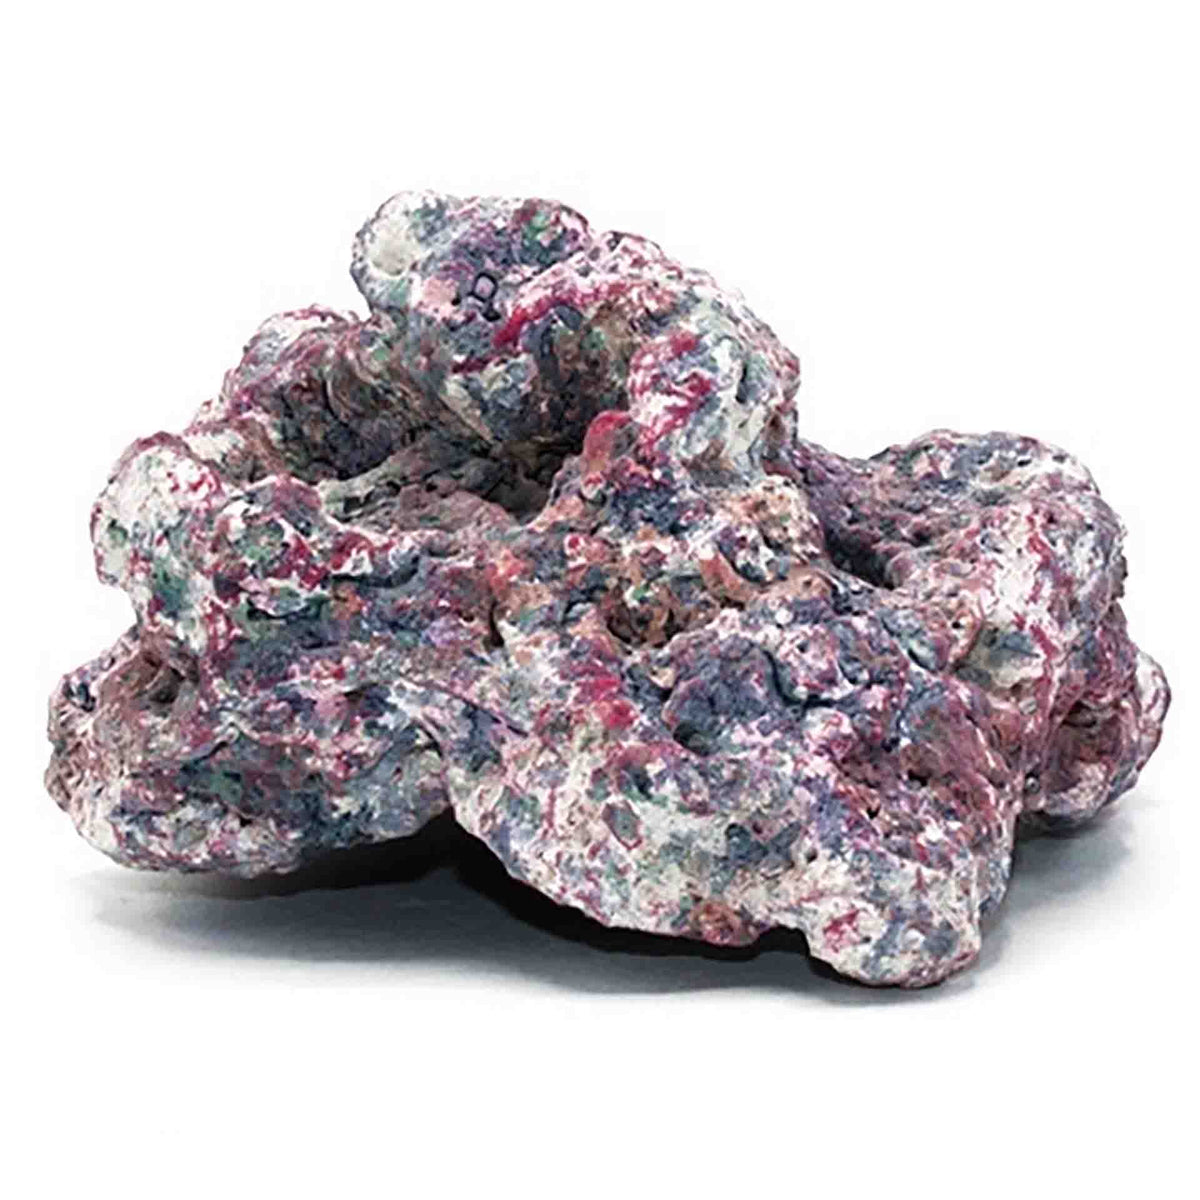 Premium Base Java Reef Rock - Sold per 100g - In Store Pick Up Only